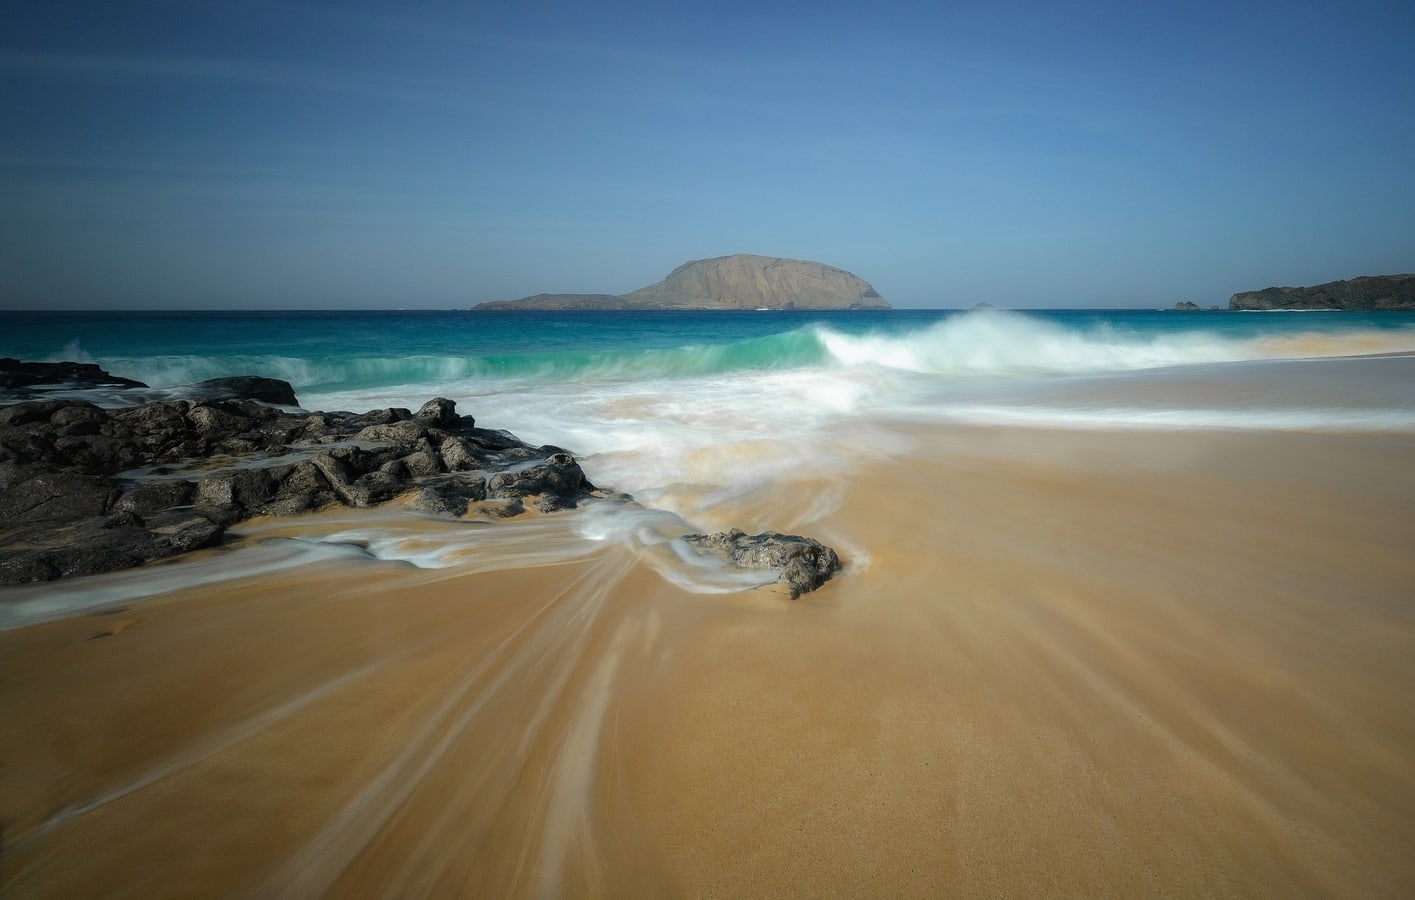 Long exposure landscape photography in beach